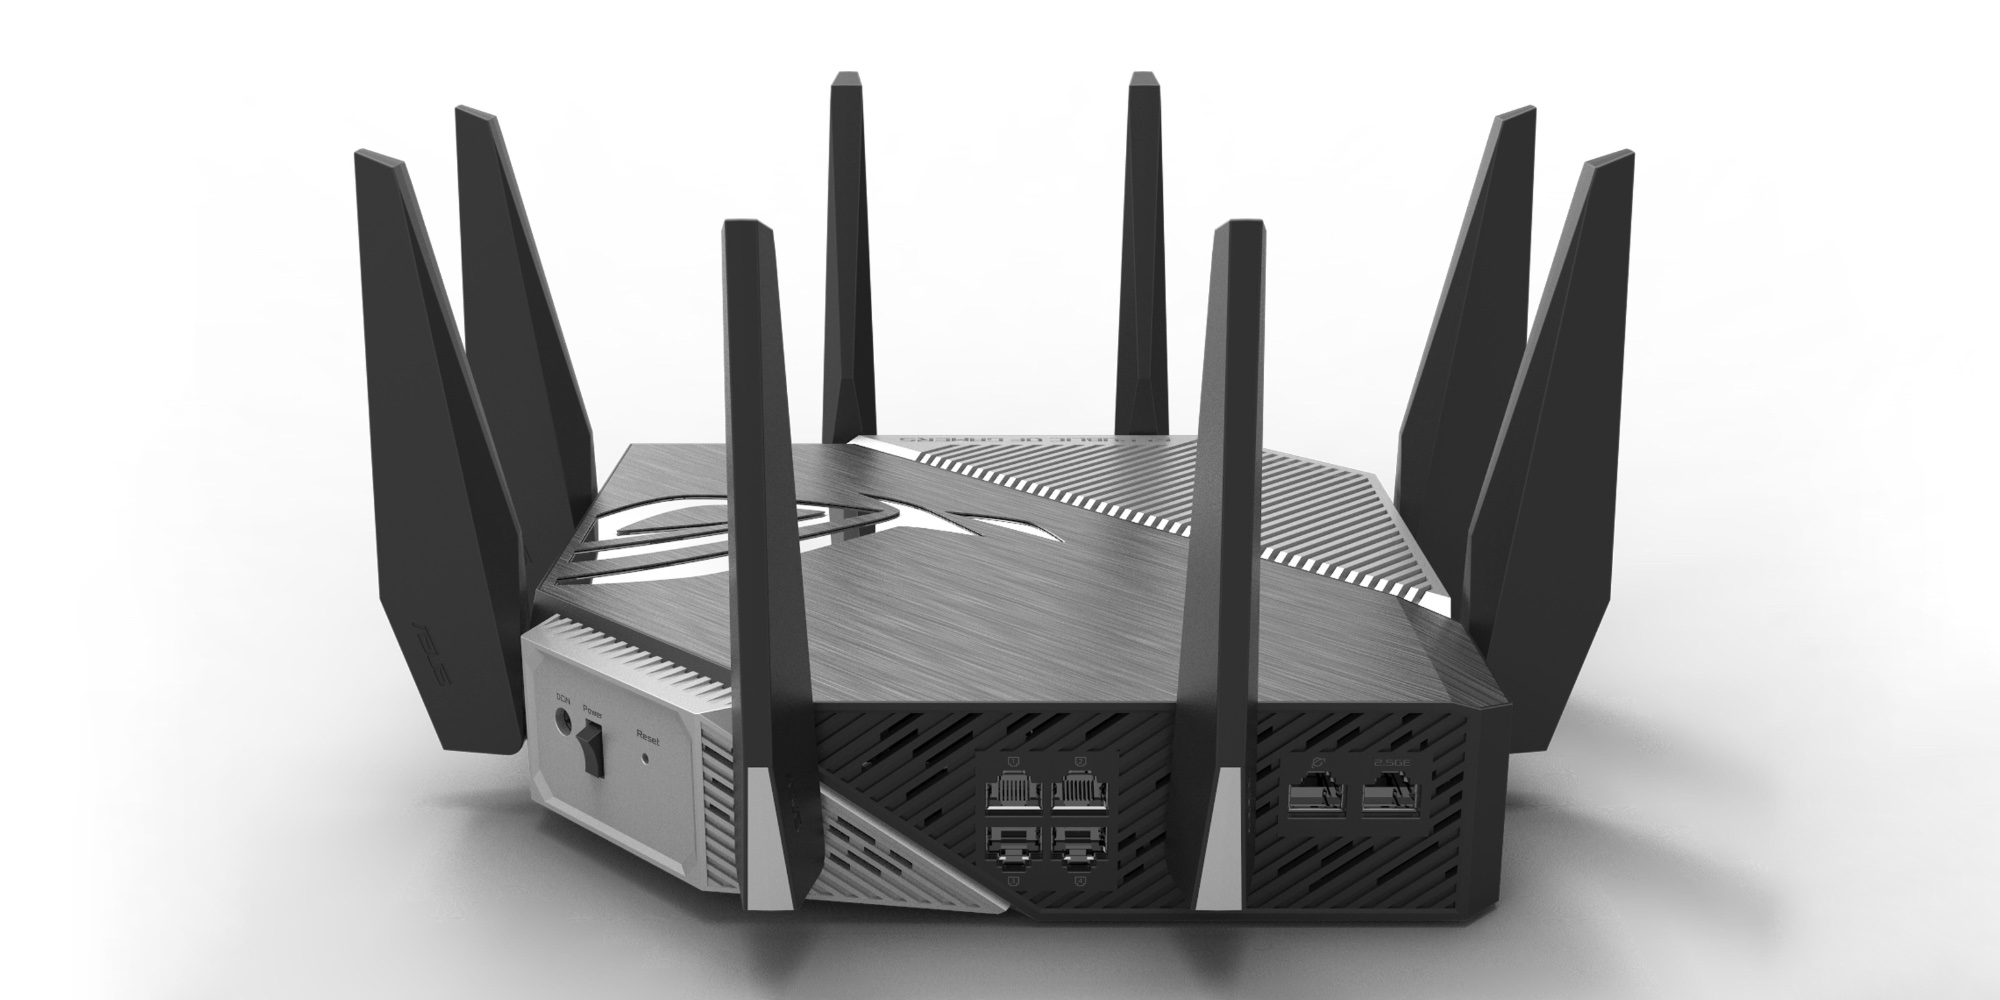 asus-brings-wi-fi-6e-to-the-market-for-the-first-time-with-upcoming-router